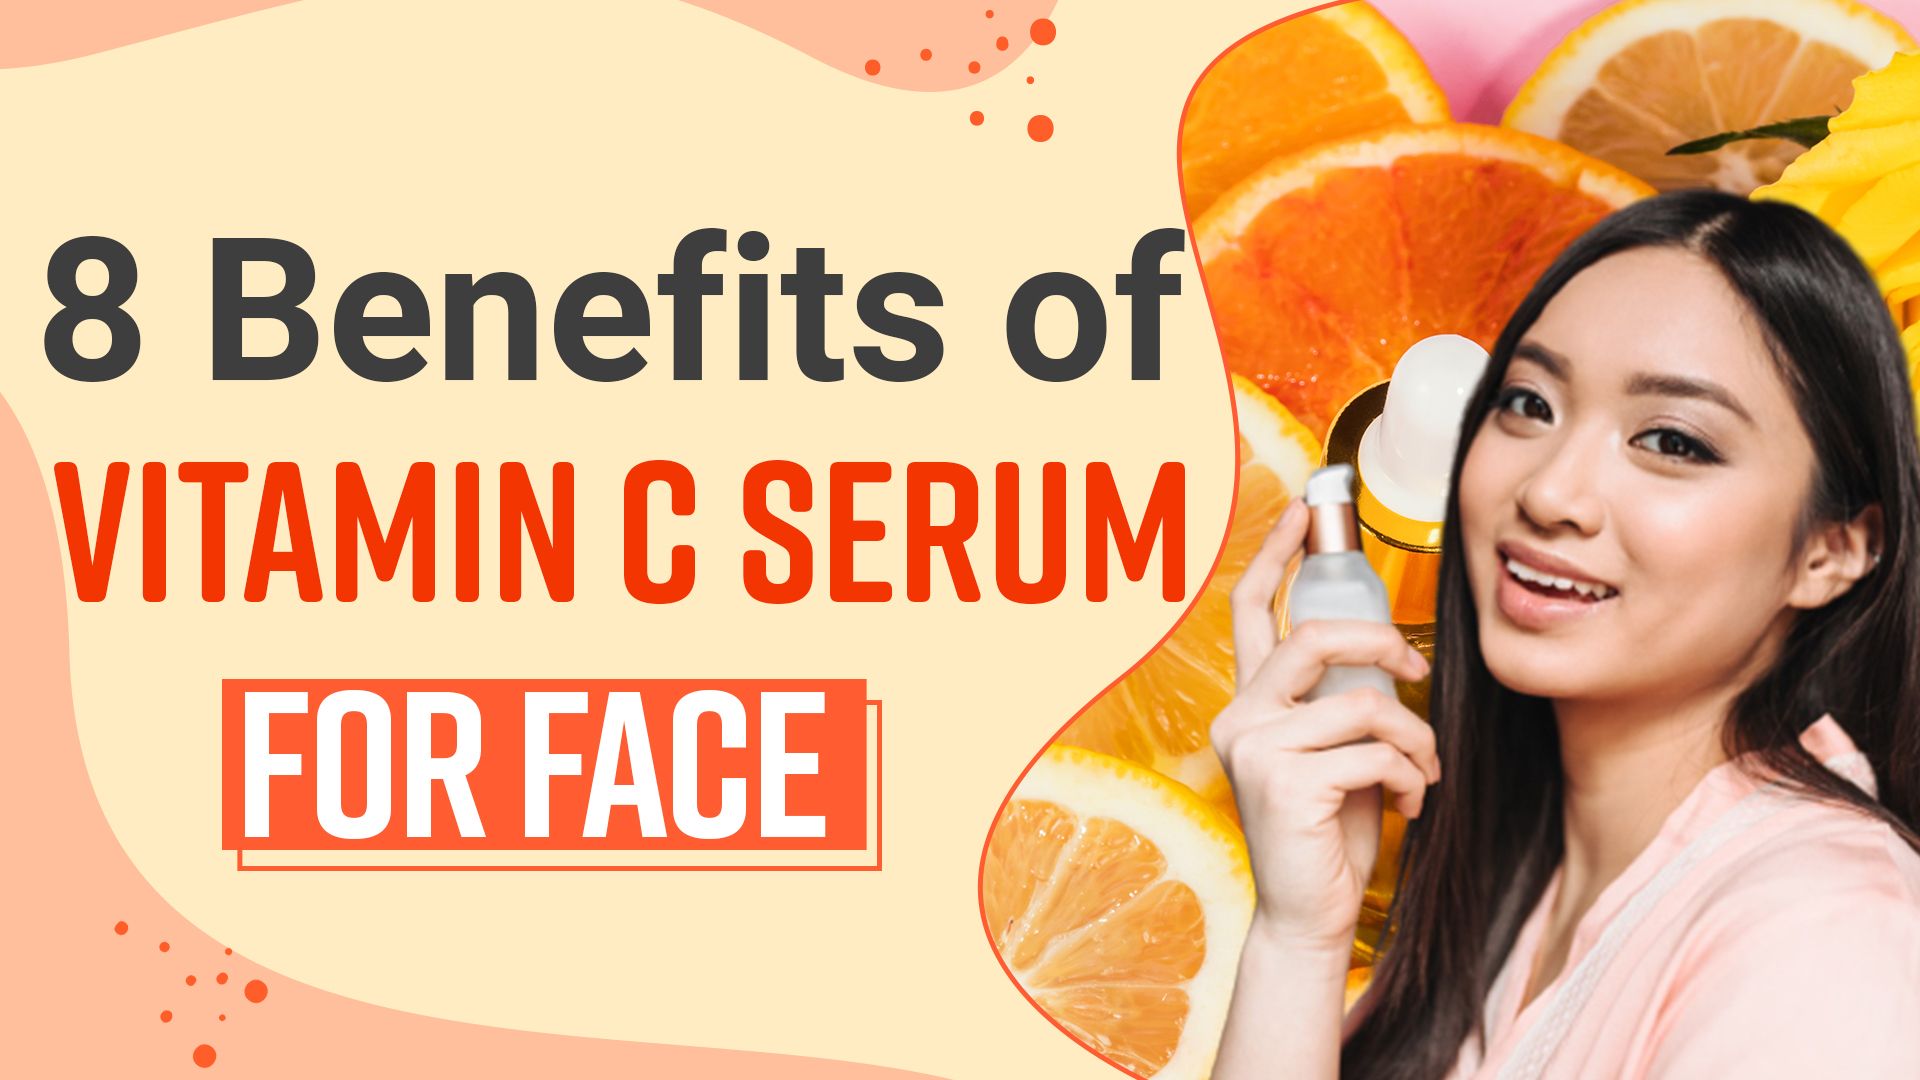 8 Benefits Of Vitamin C Serum For Face And How Use Complete Guide; Watch Video